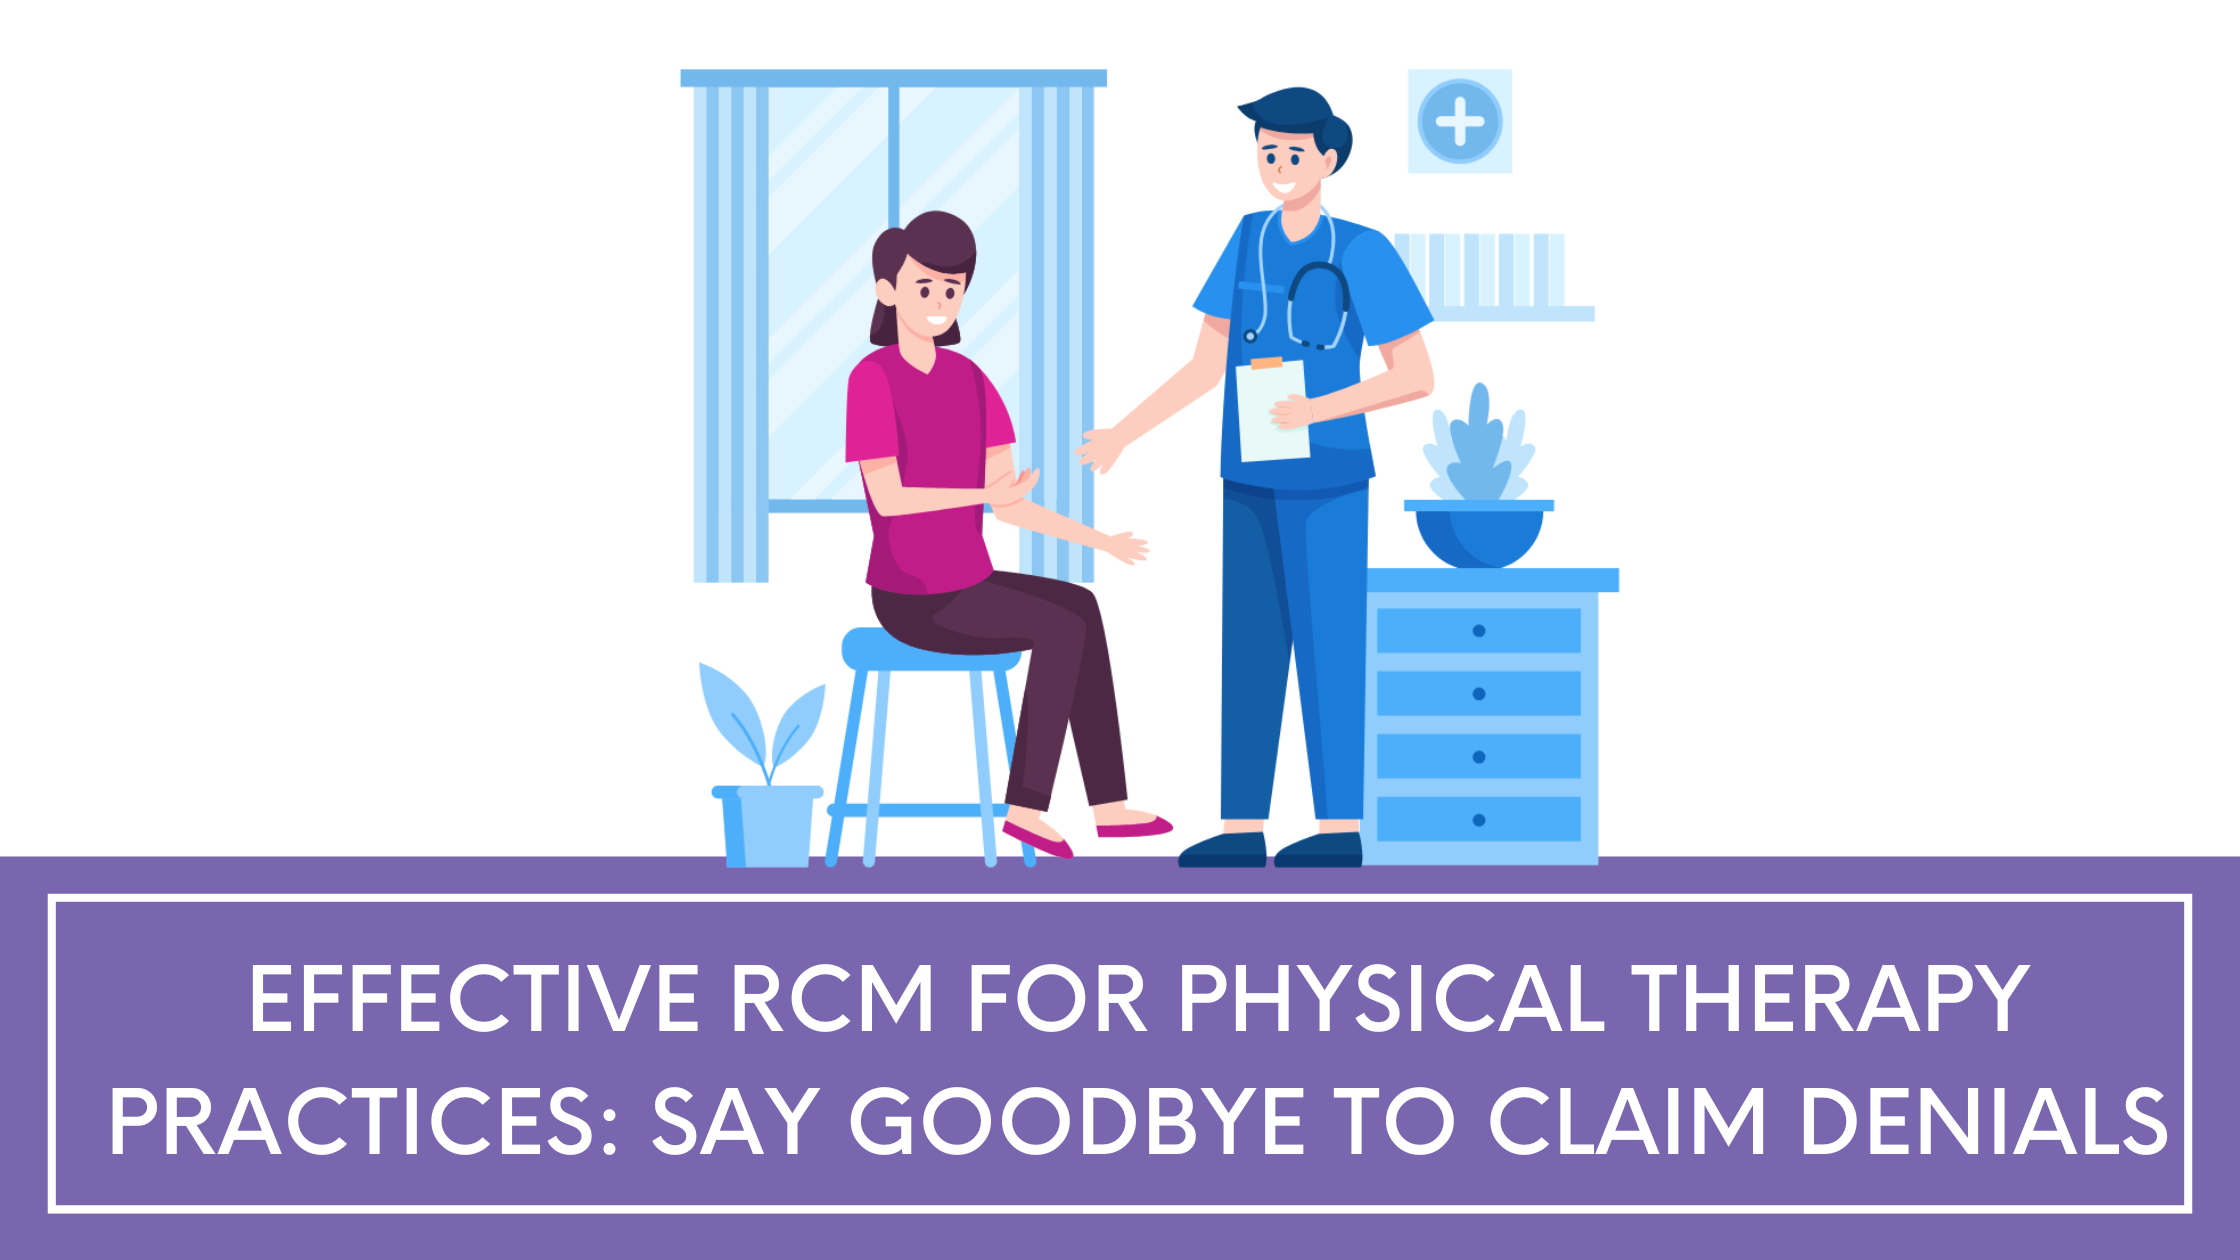 Effective RCM for Physical Therapy Practices: Say Goodbye to Claim Denials